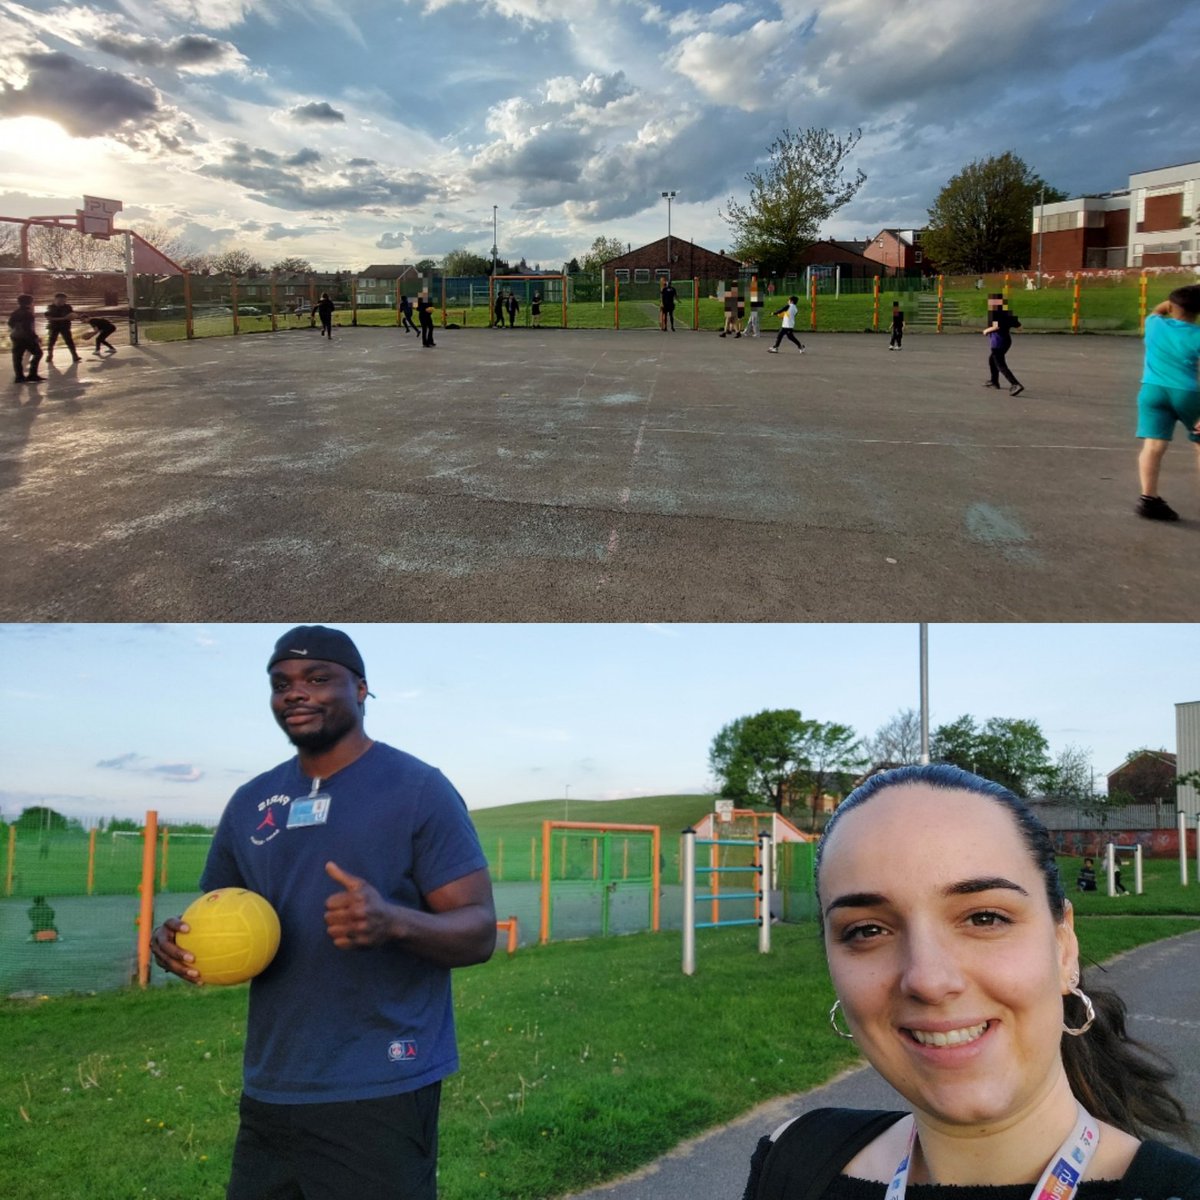 Youth workers in BRH facilitated a giant dodgeball game bringing together young people from across the community

Youth workers also had conversations around toxic relationships & warning signs 

@BARCALeeds @LeedsCommFound @TNLComFund #streetsafe #youthworkworks #streetsafe